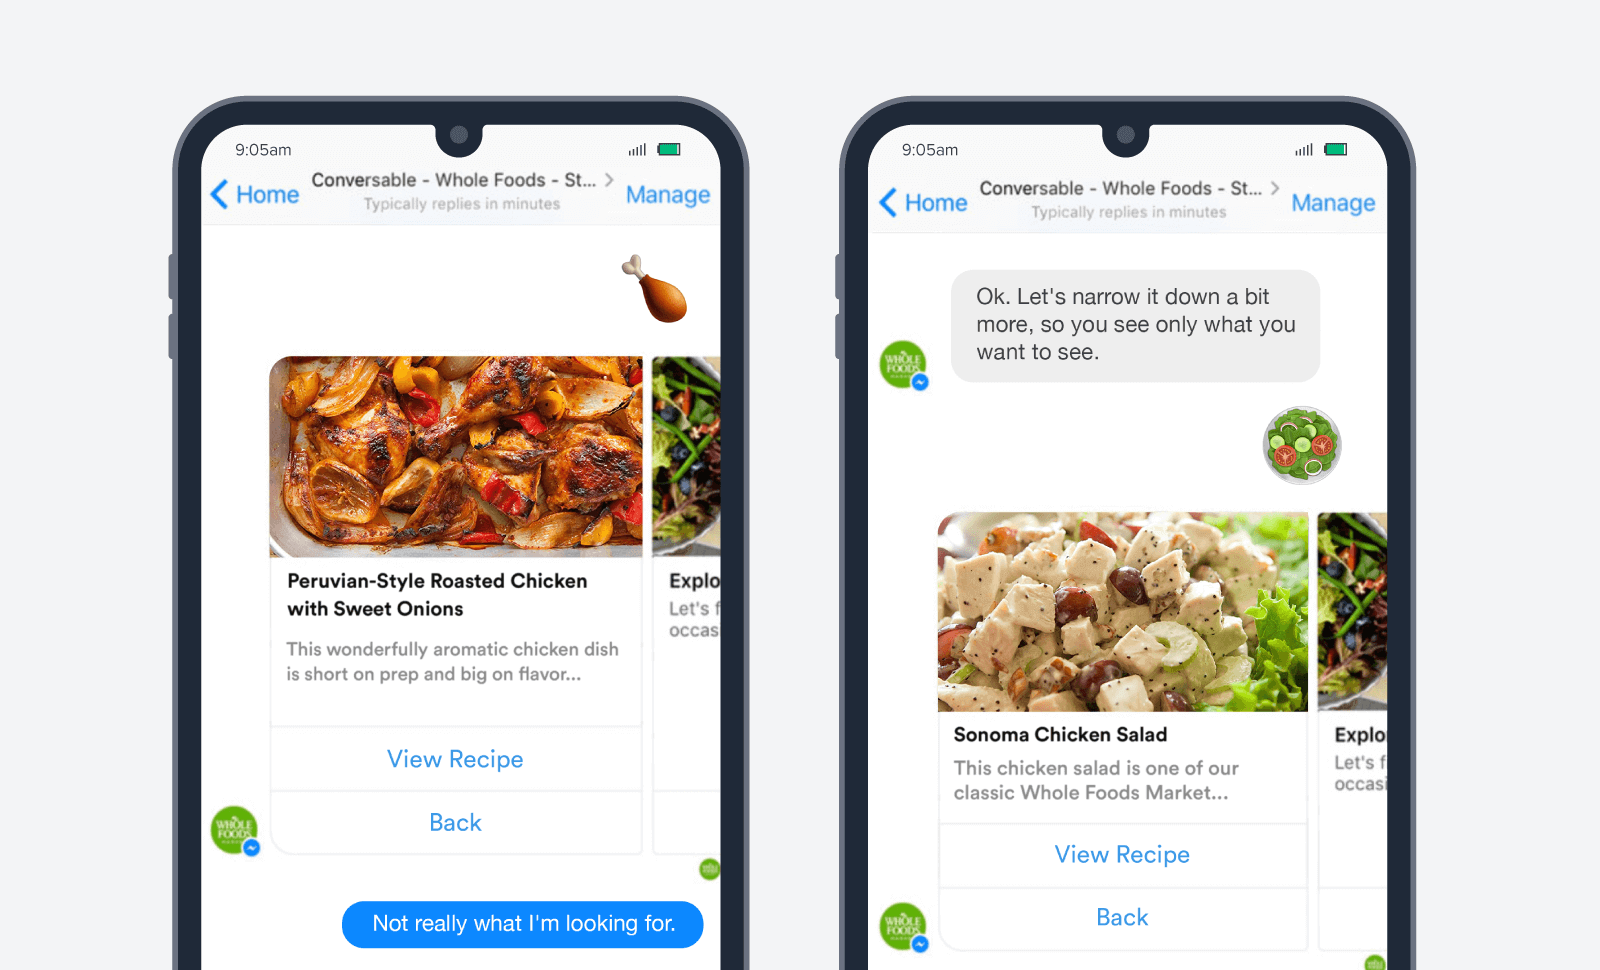 Whole foods chatbots meet customers where they are without the need for trigger campaigns or app downloads